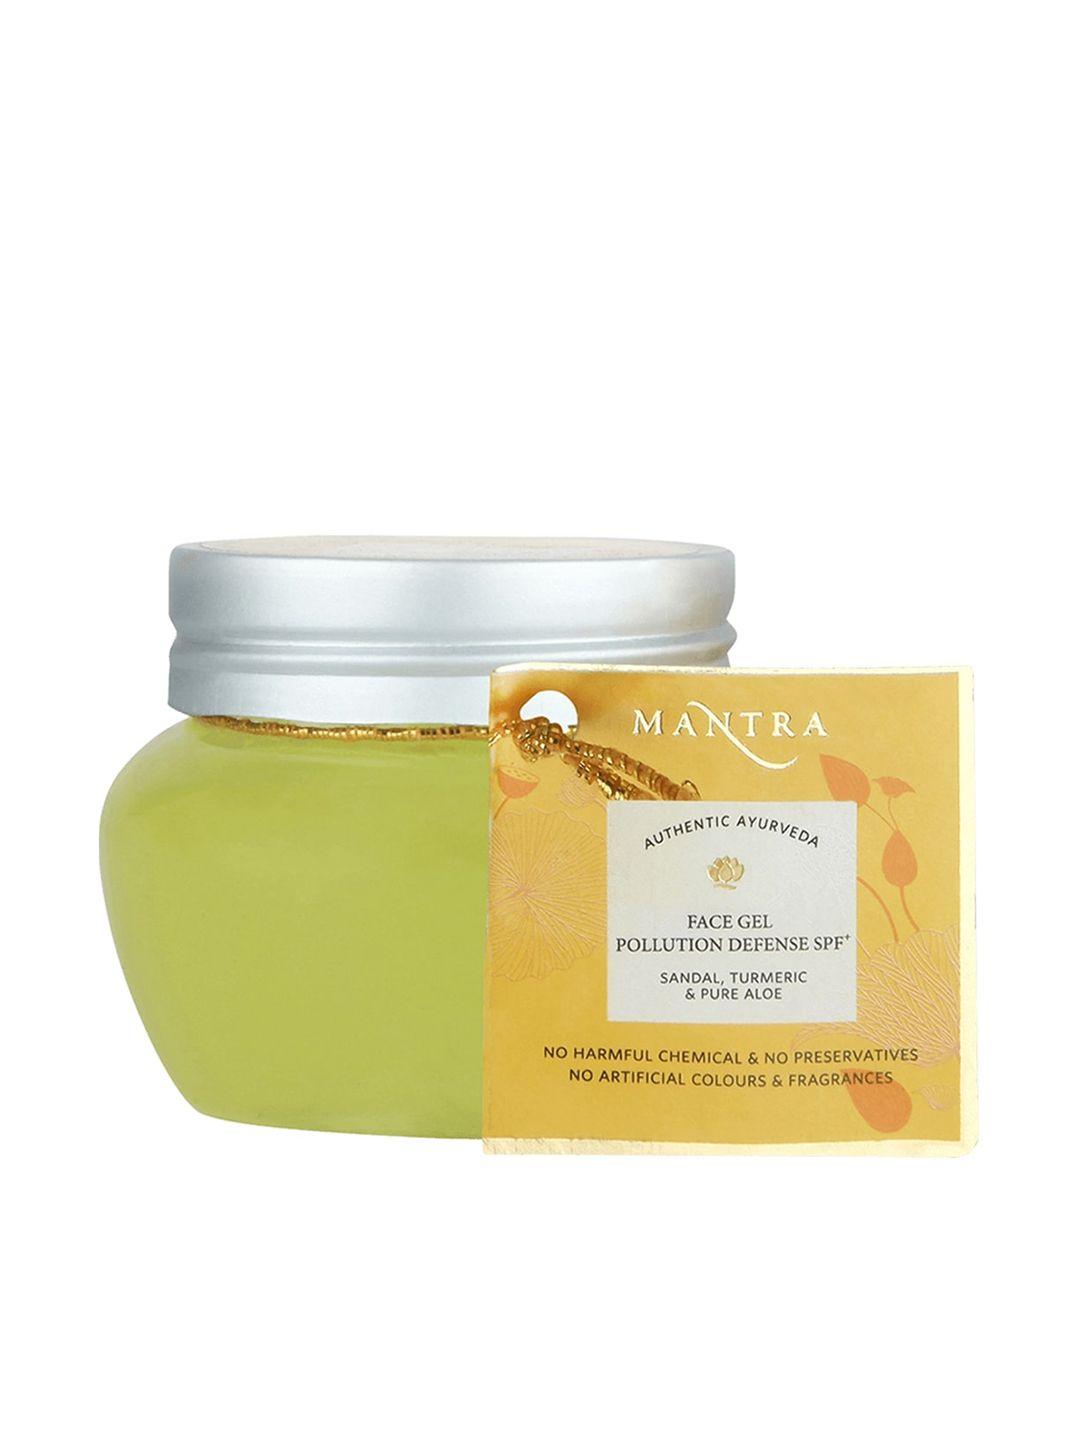 mantra herbal pollution defense spf+ face gel with sandal turmeric & pure aloe - 100g